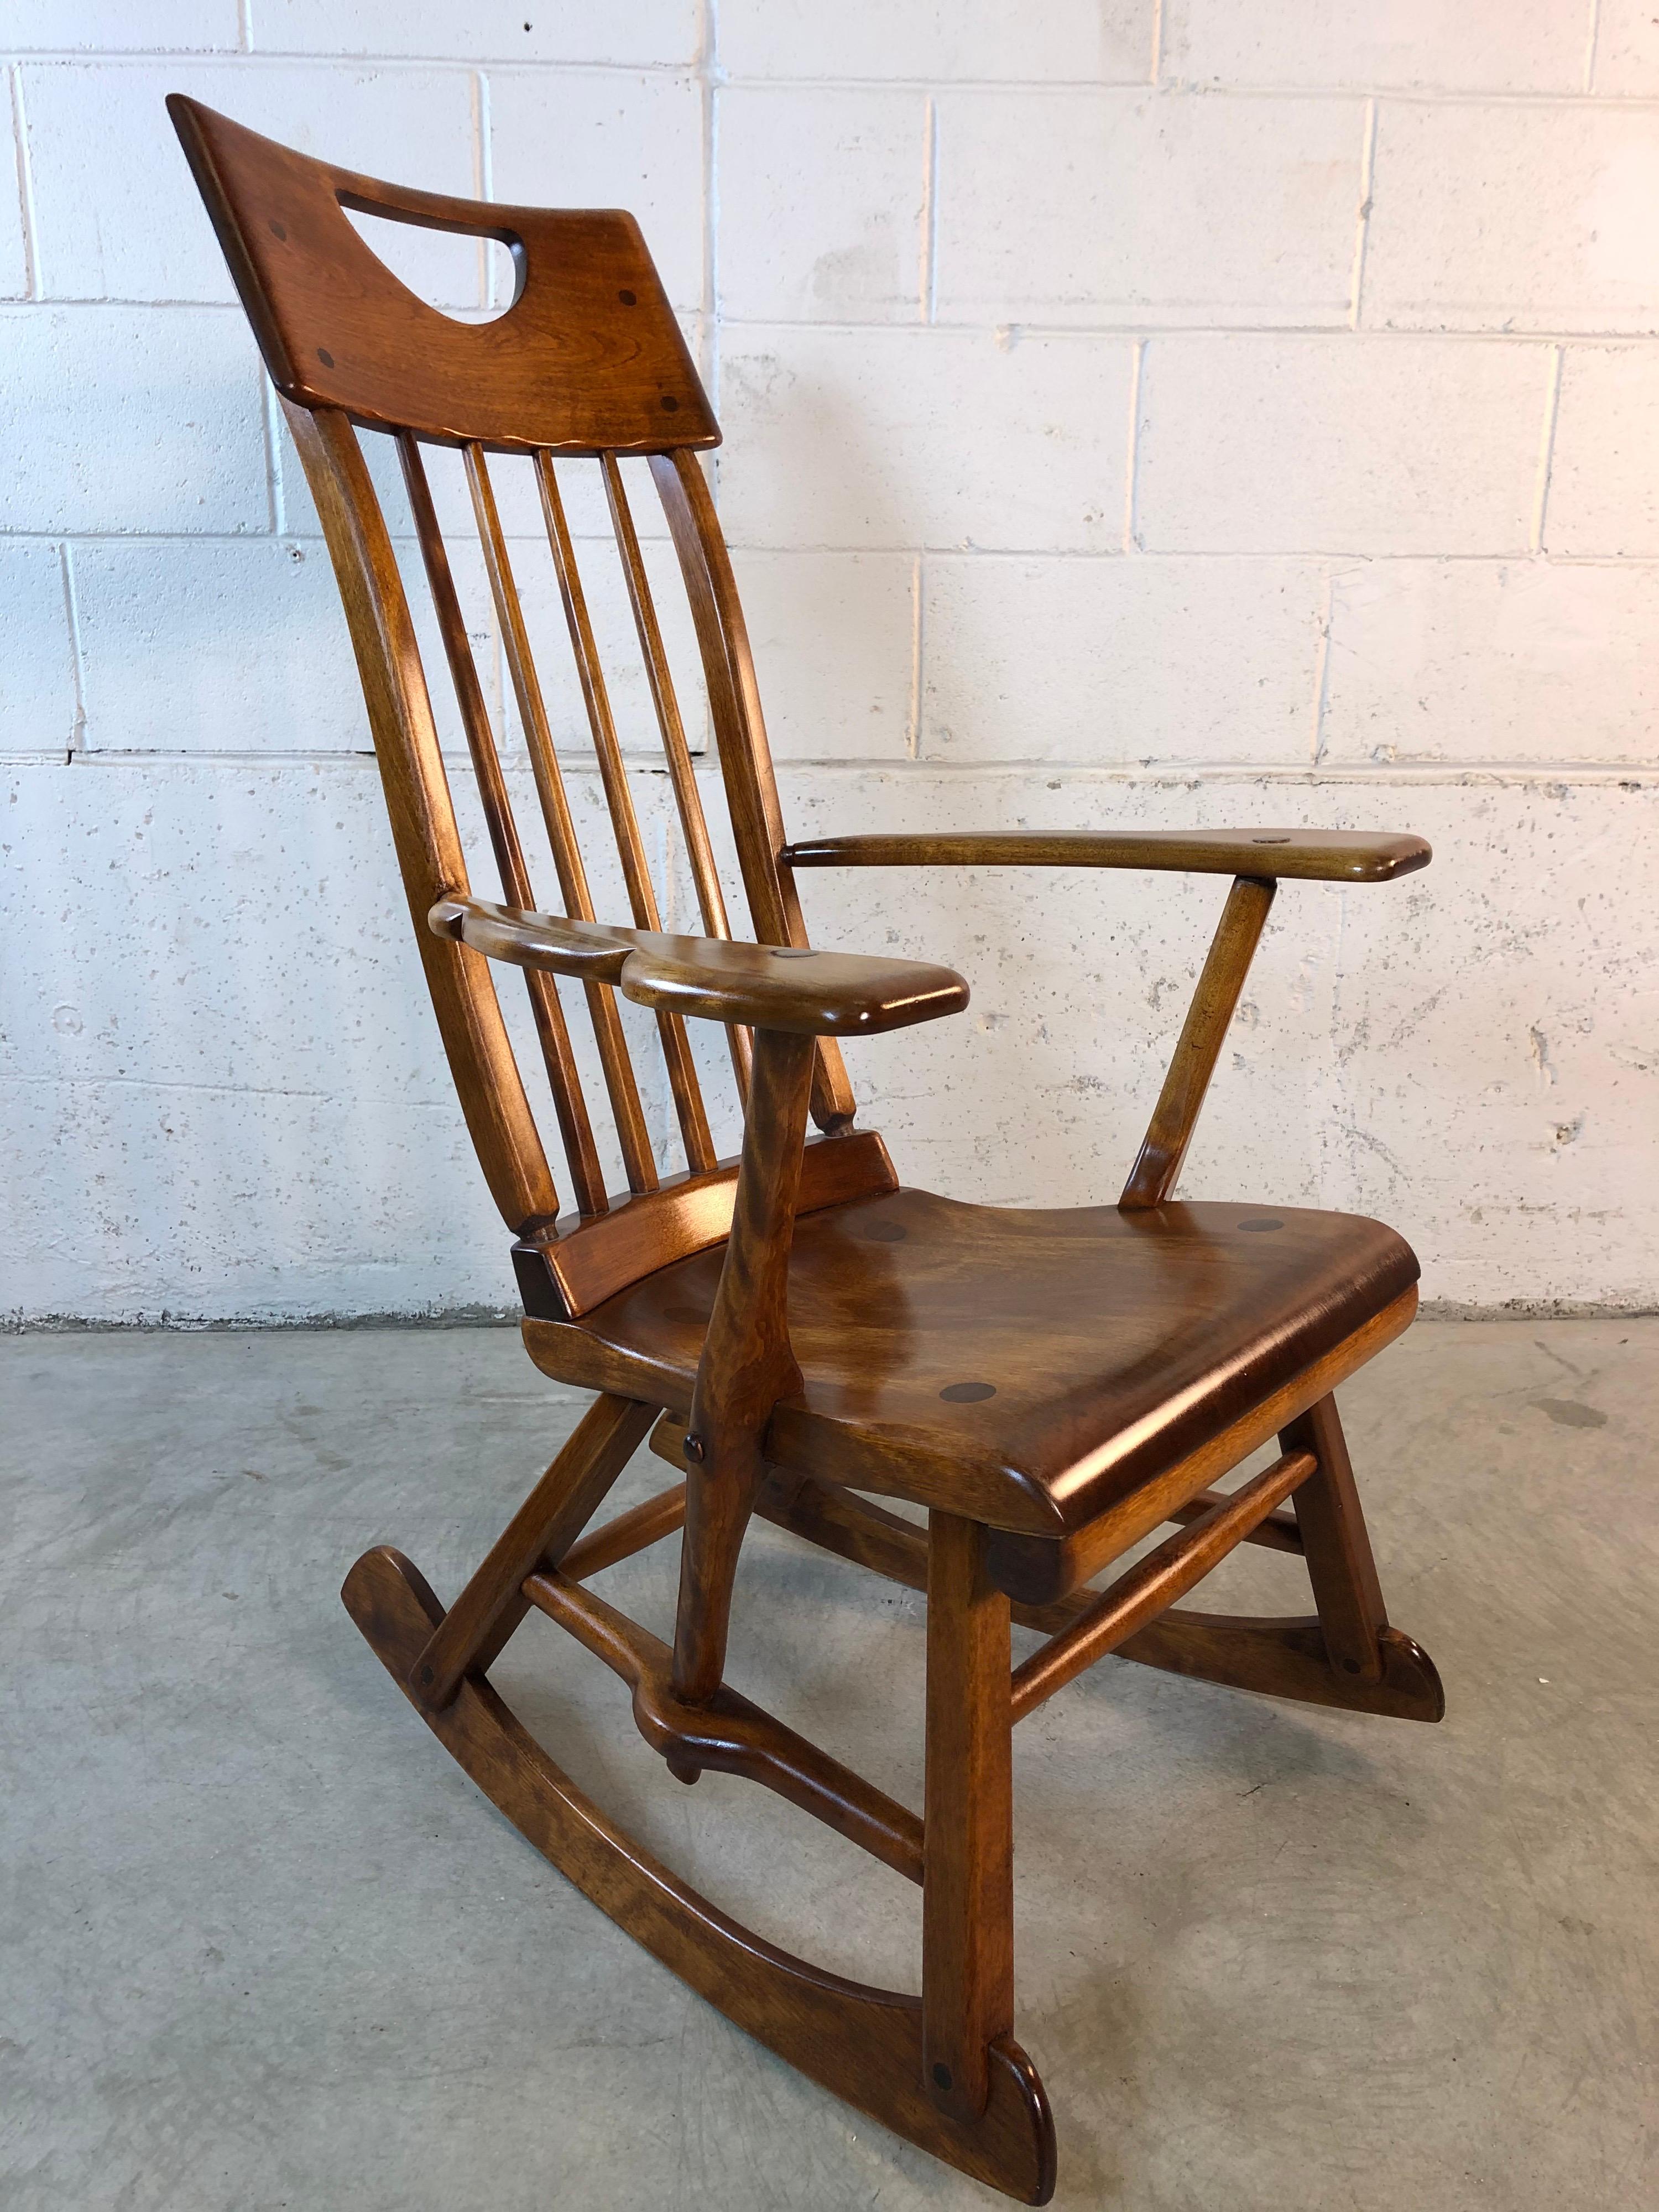 Maple Colonial American High-Back Rocking Chair by Herman De Vries for Sikes Furniture